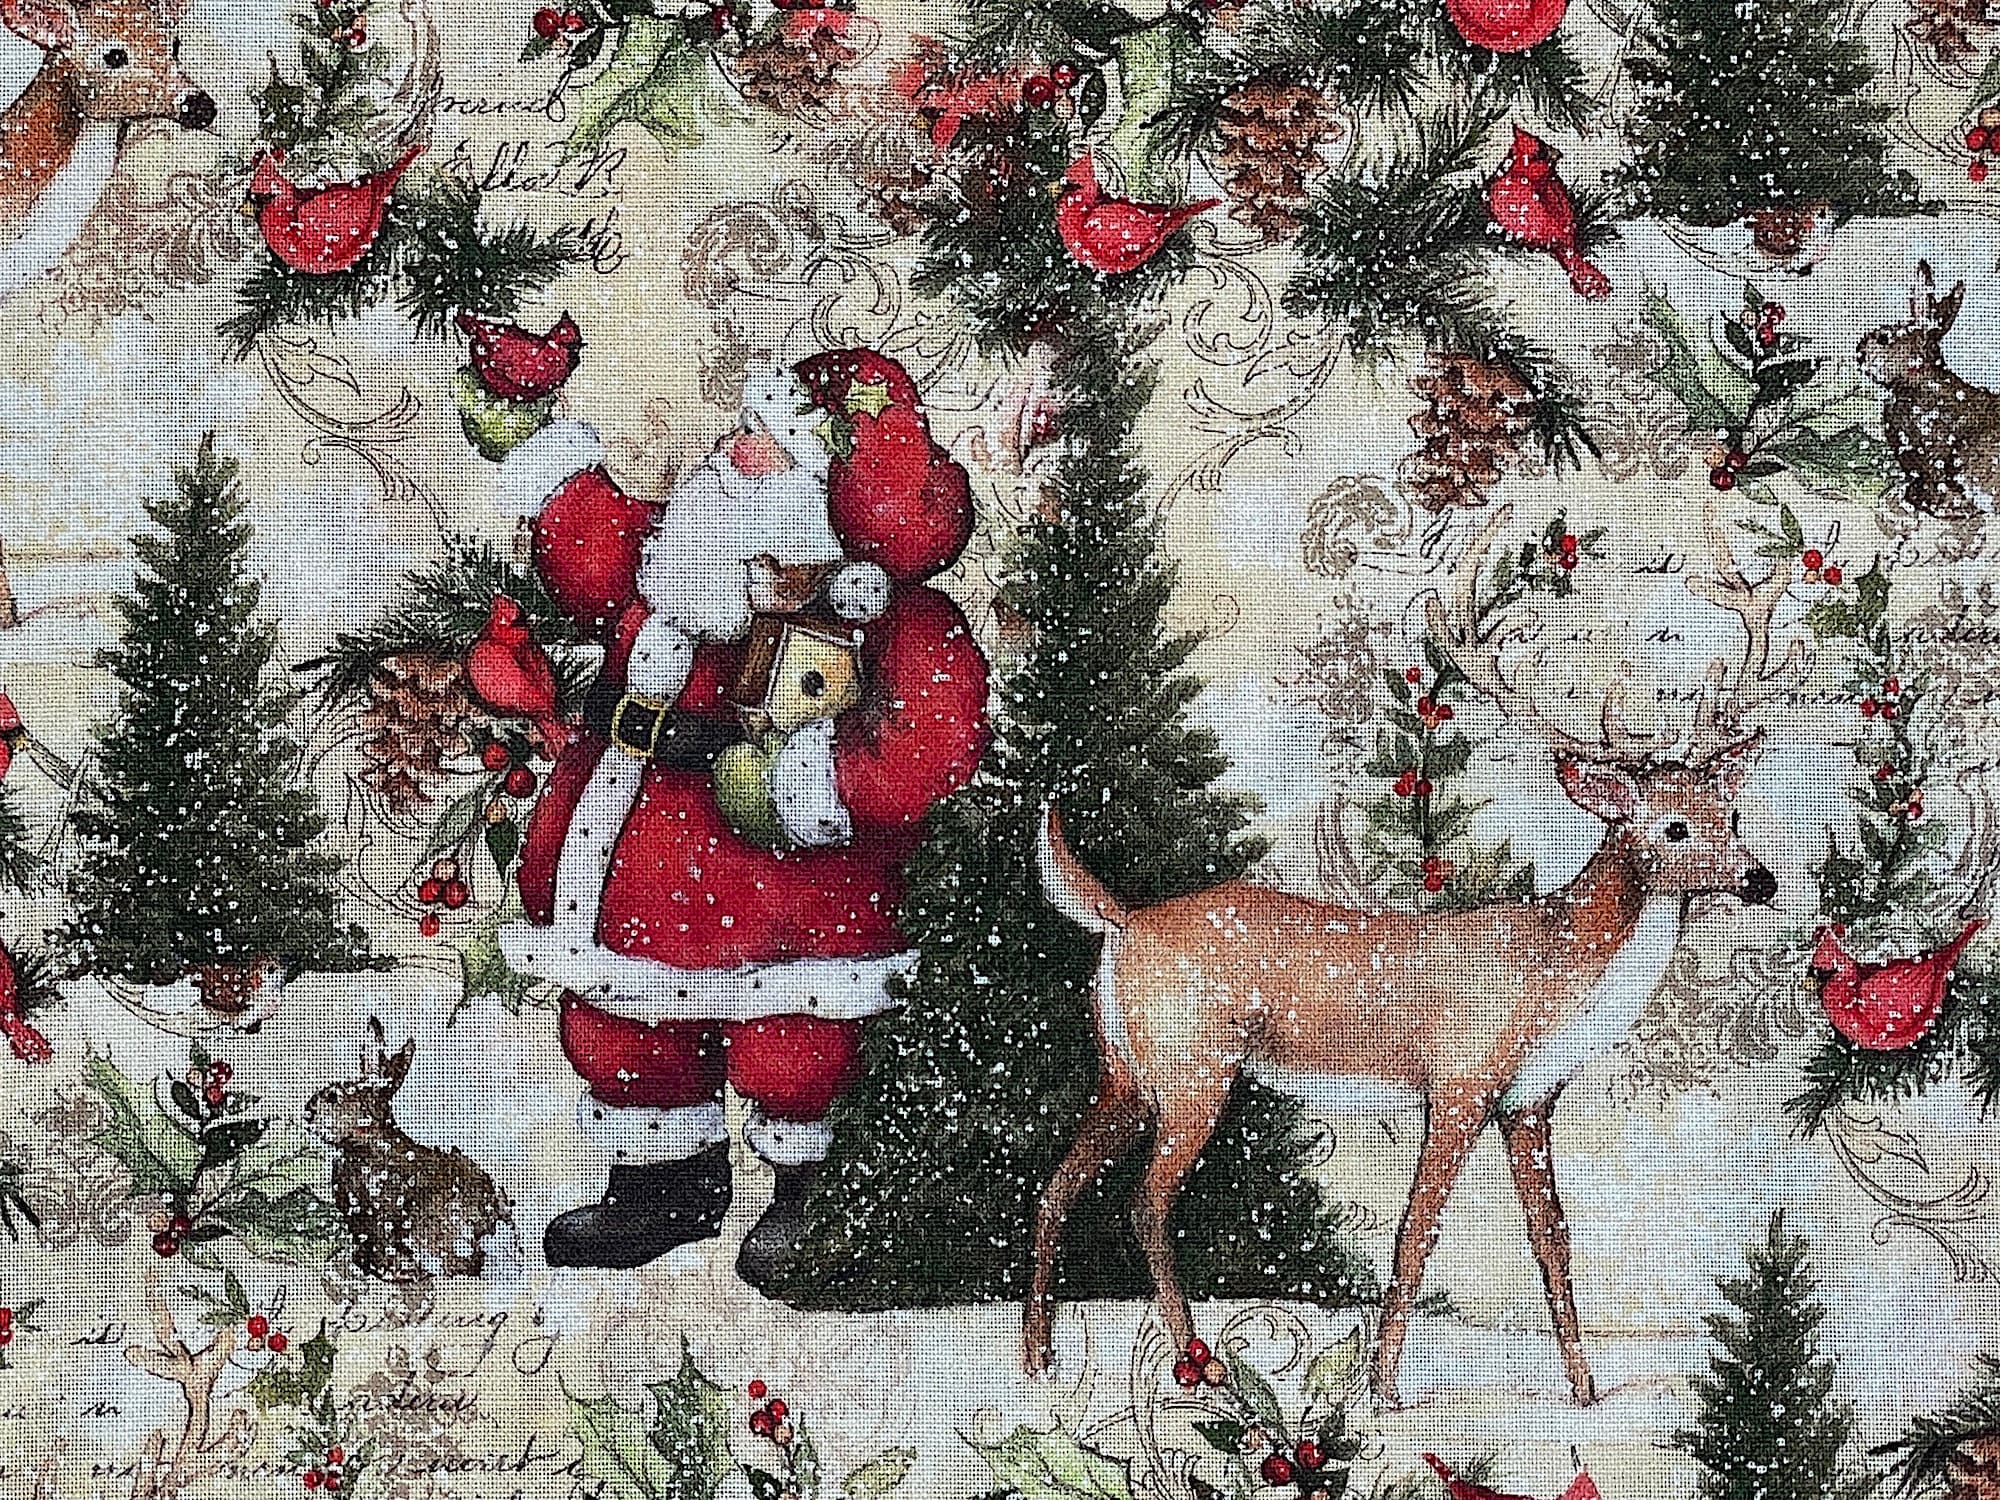 Close up of Santa Claus, reindeer, trees and birds.